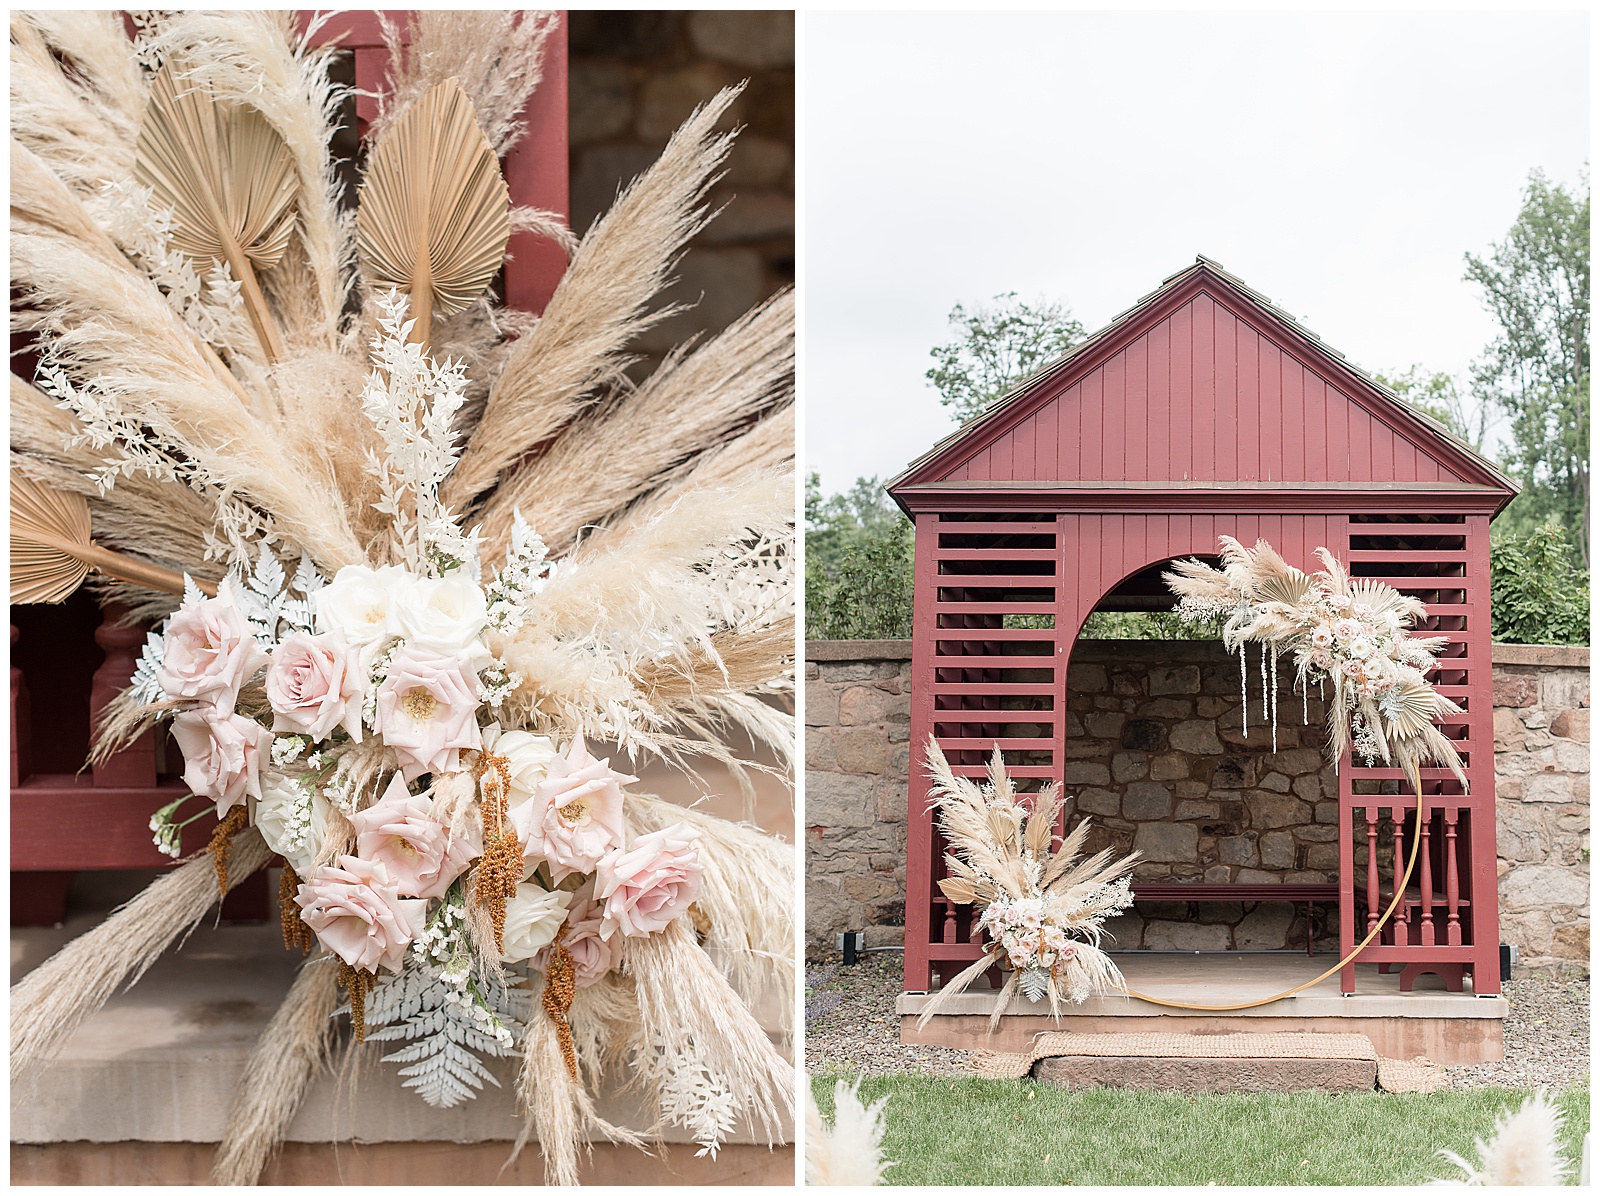 gorgeous pampas grasses and white and light pink roses arranged by maroon building for wedding ceremony